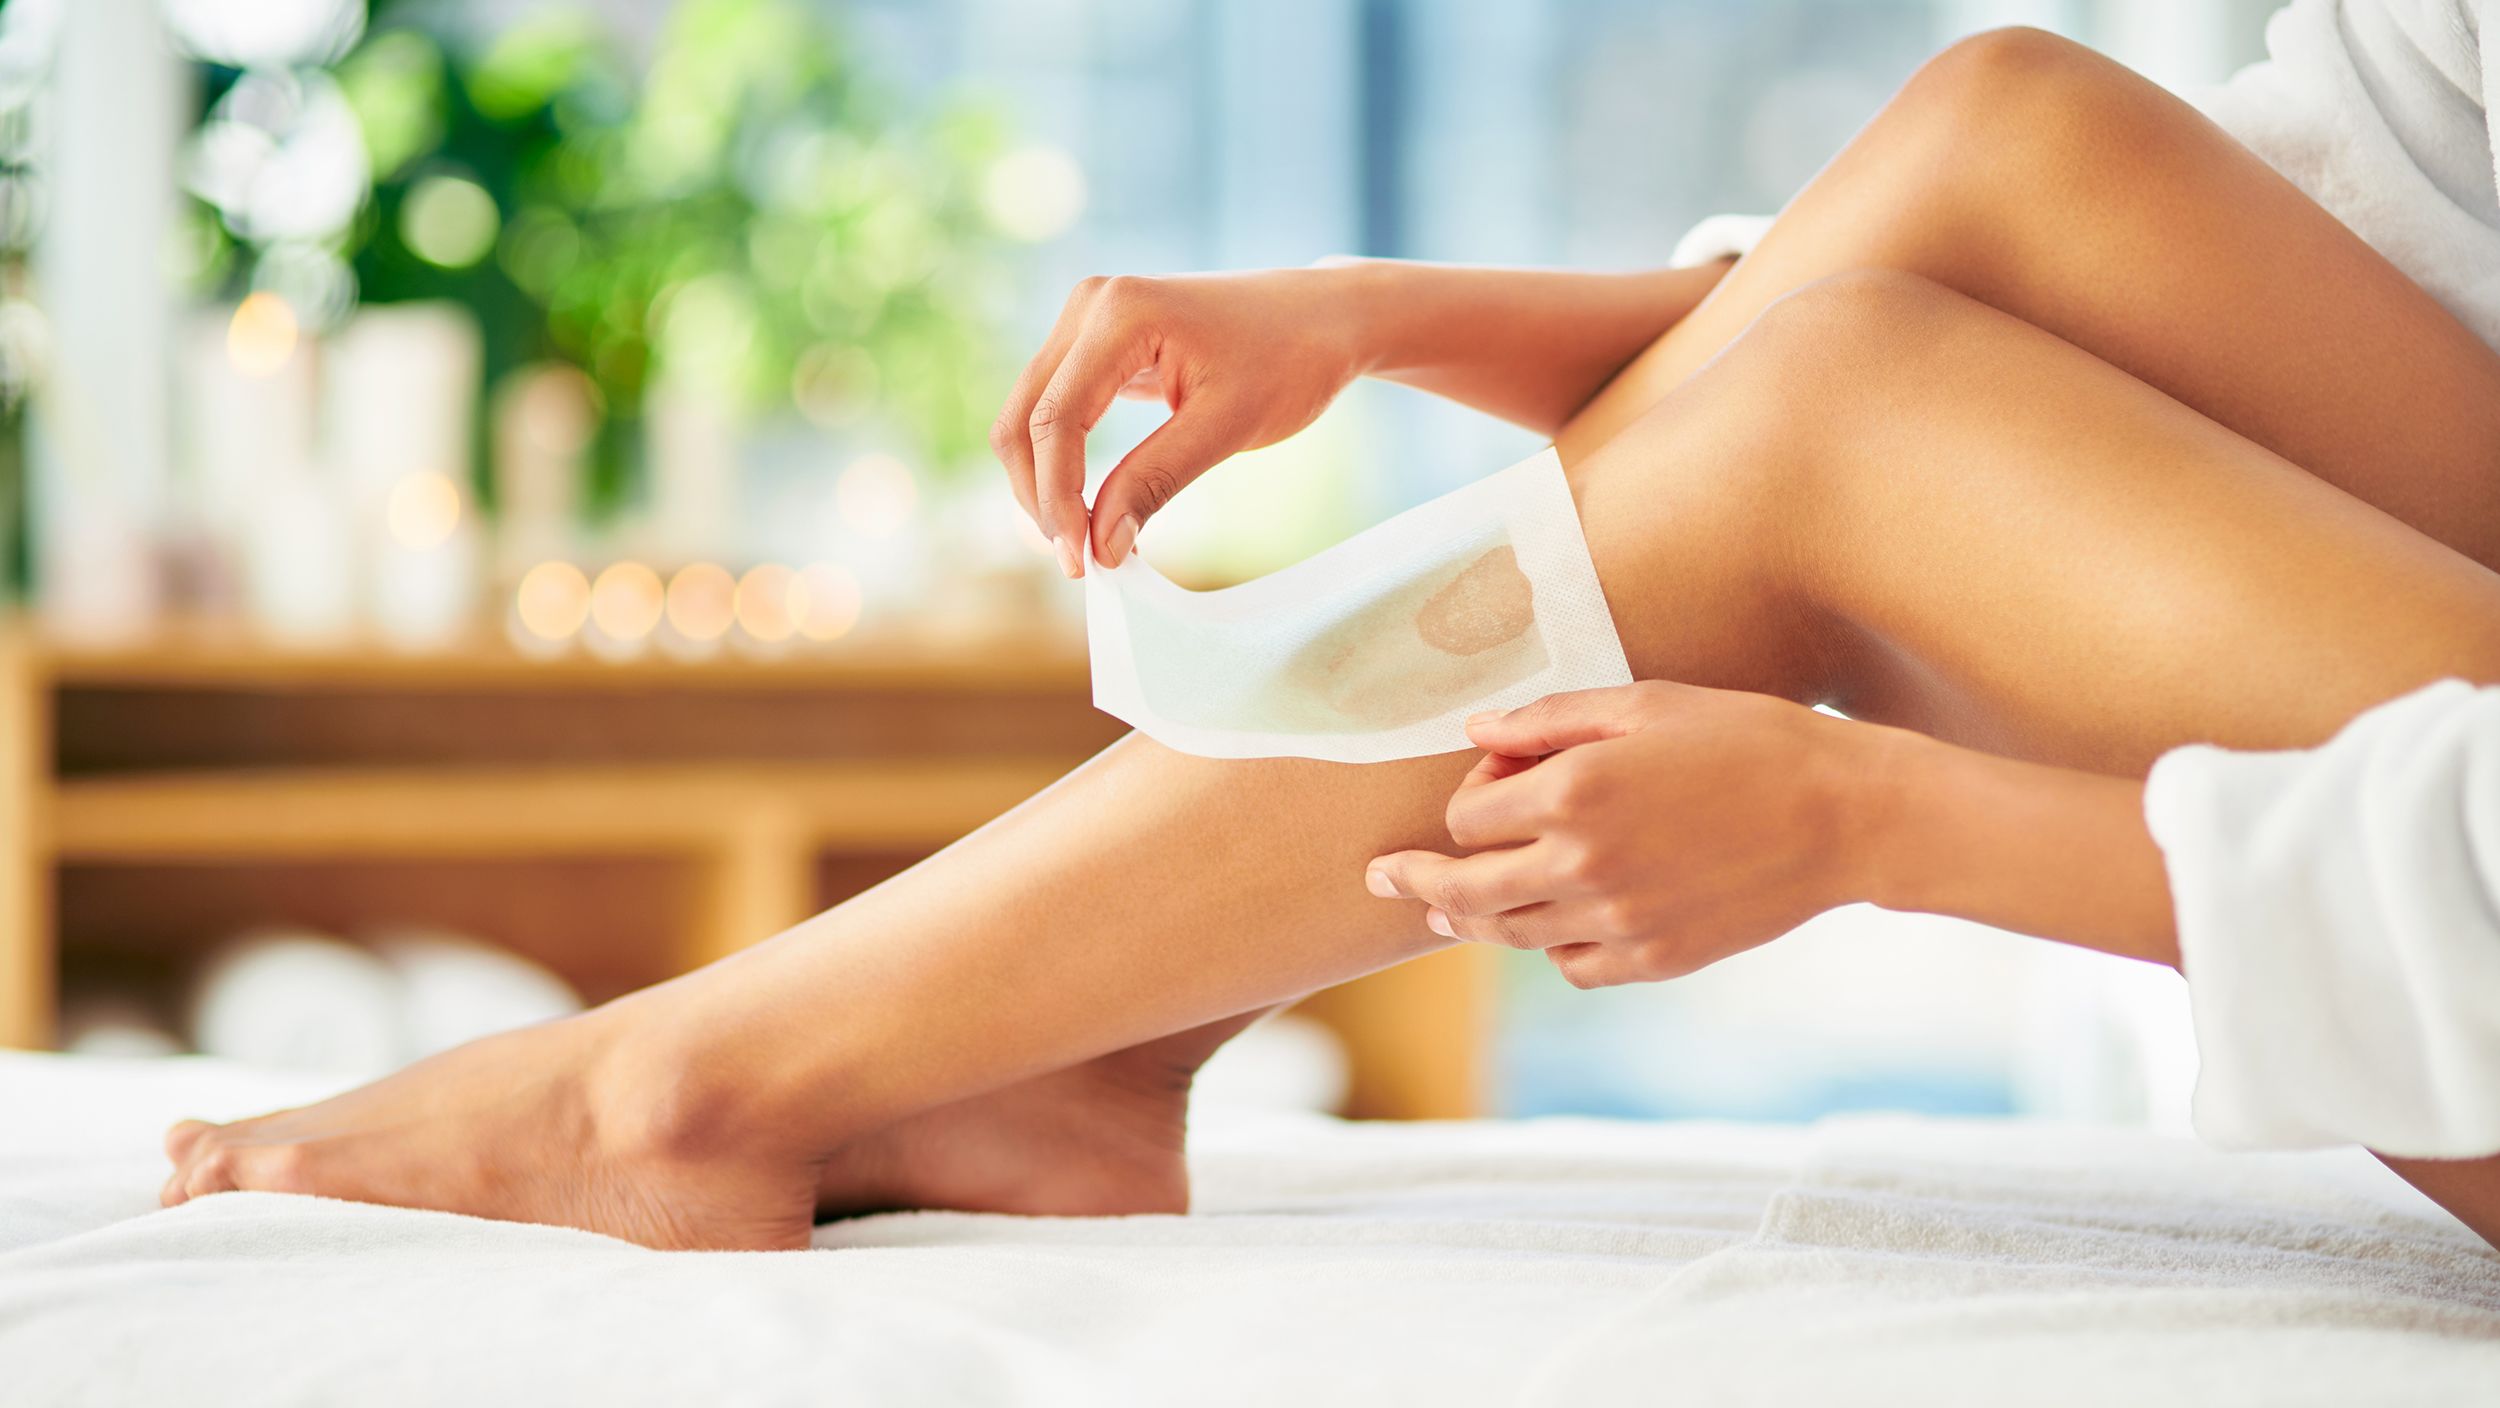 Waxing At Home - How To Do It Like A Pro